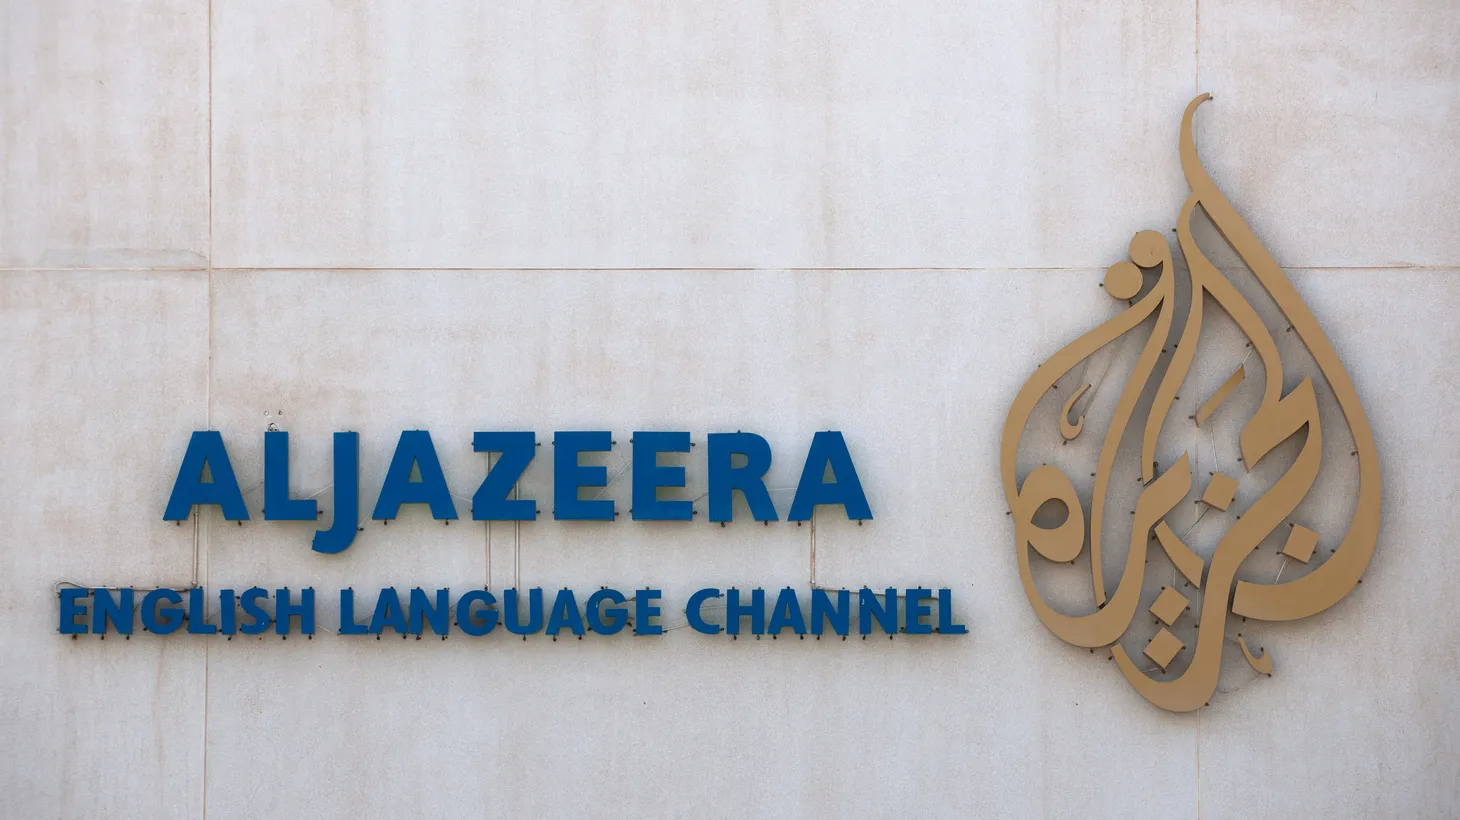 The lettering and logo of the Arab news channel Al Jazeera can be seen on the company's premises.